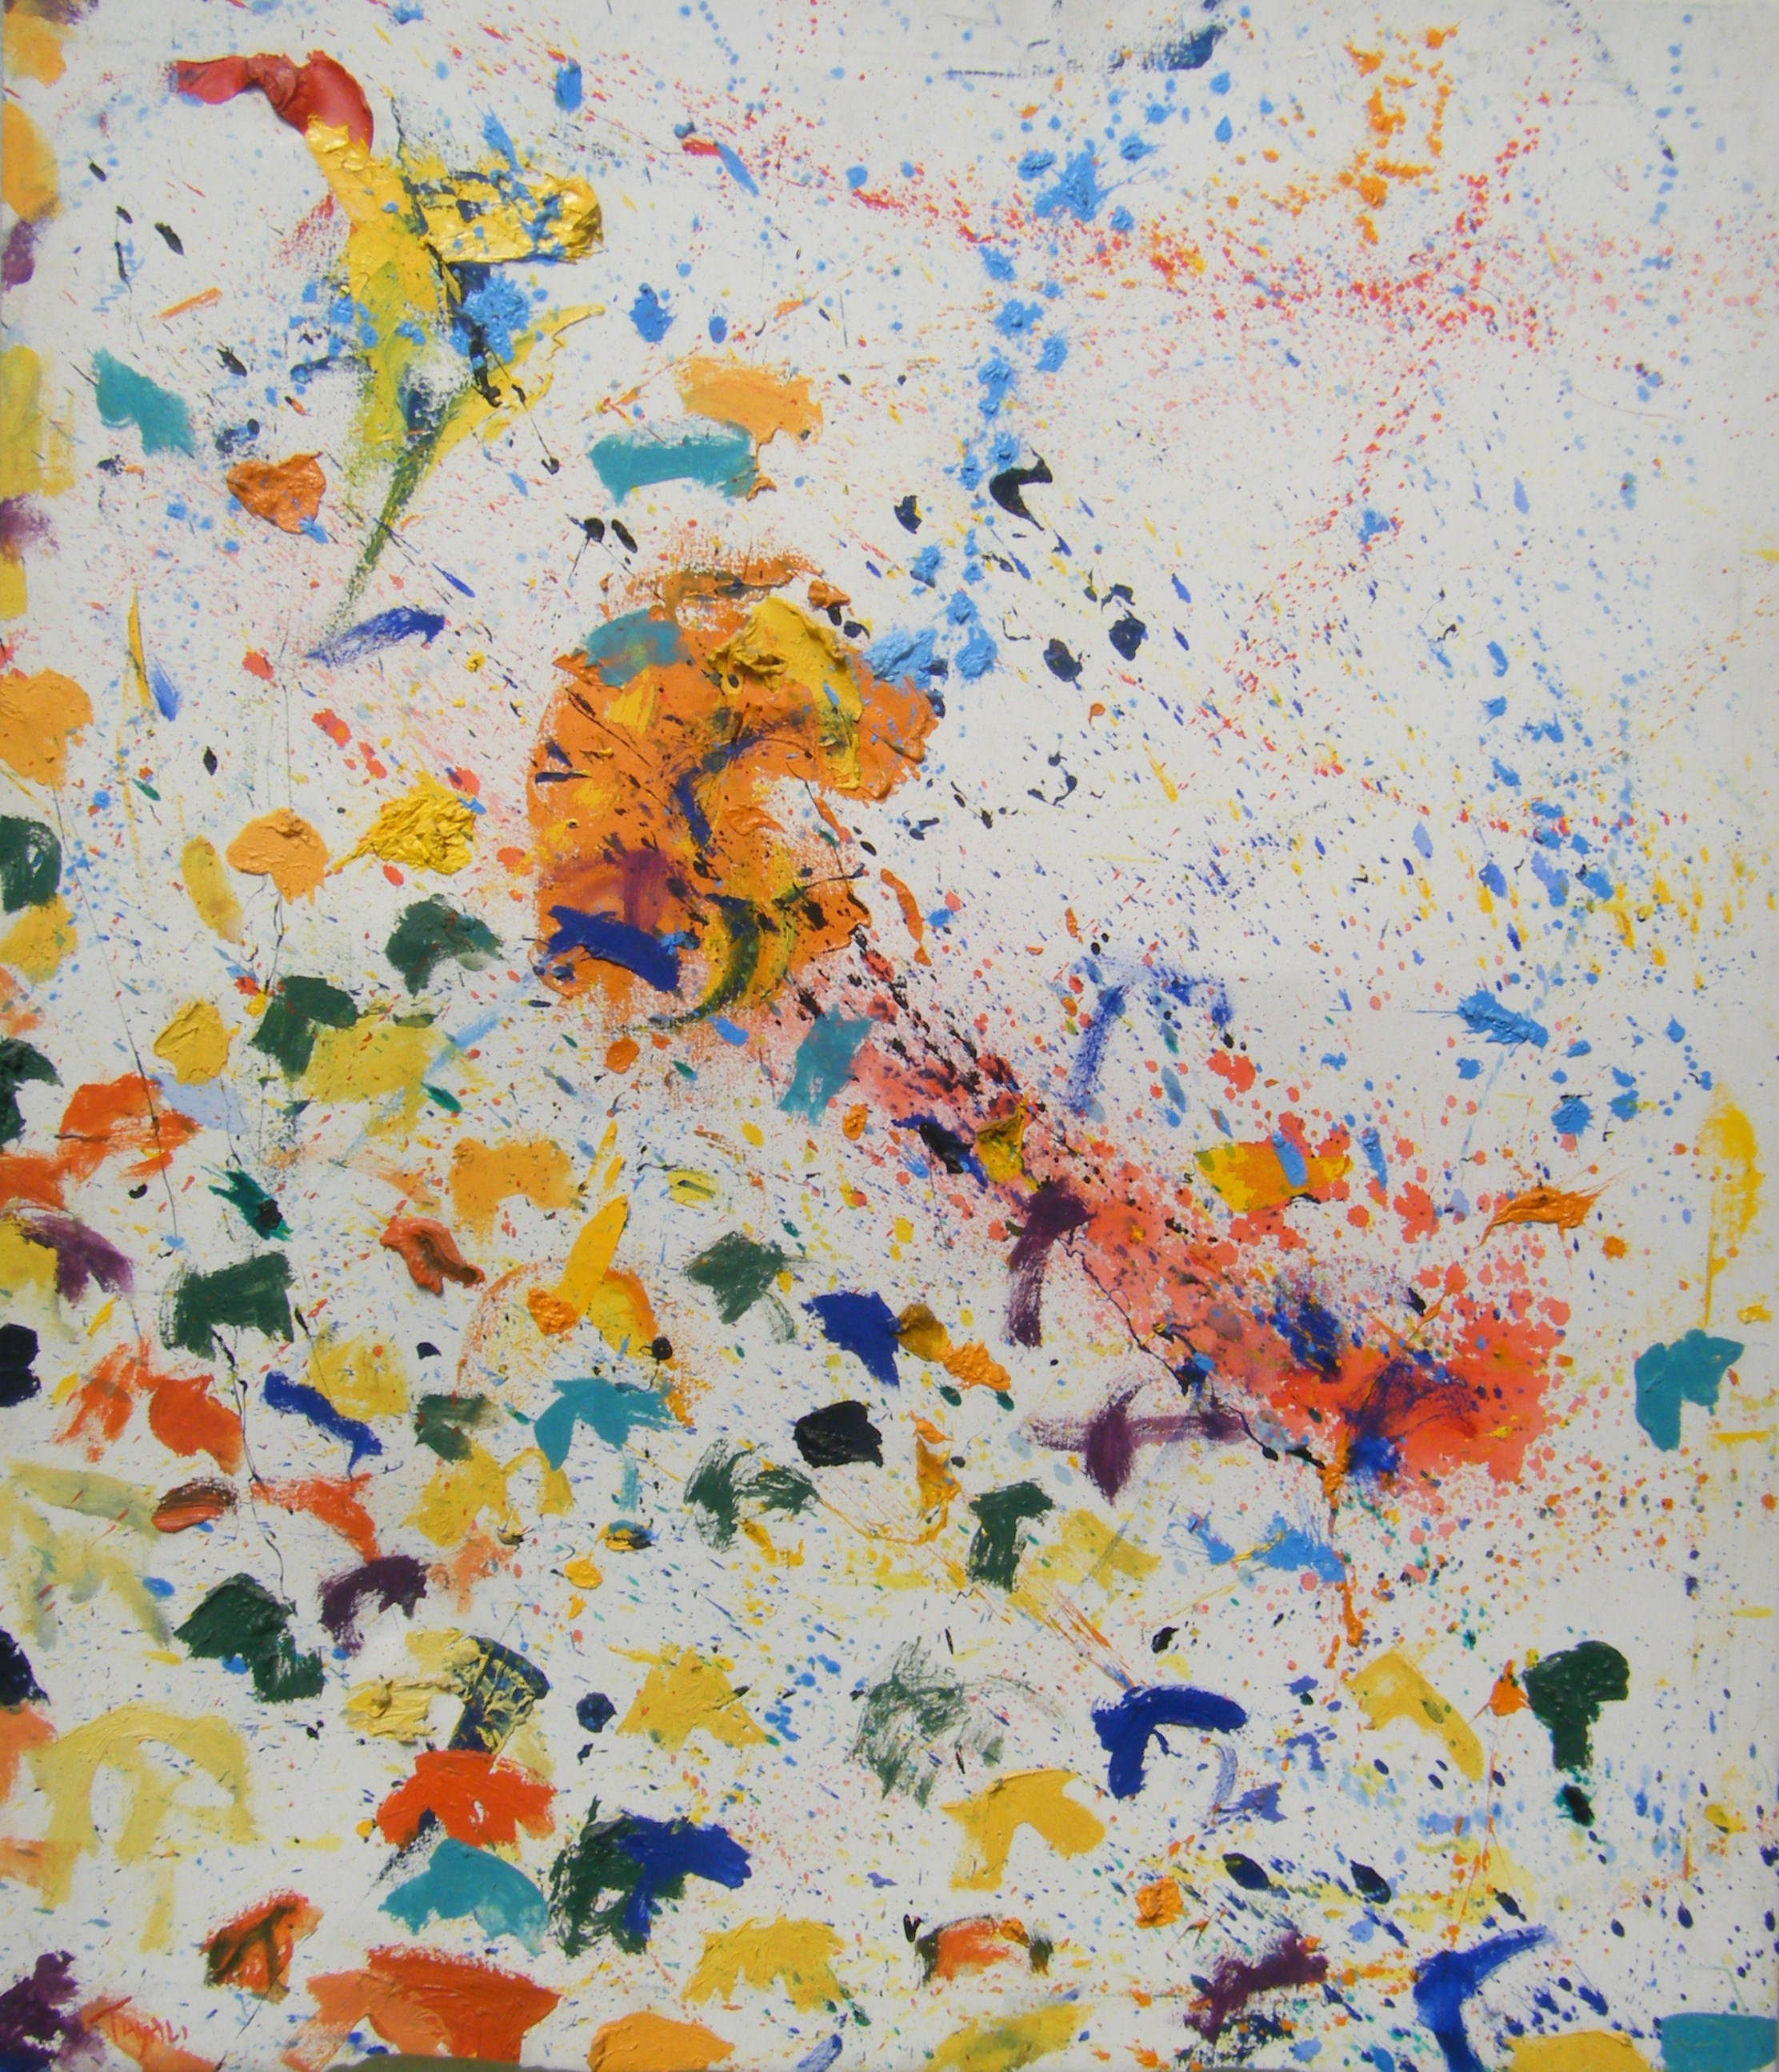 Henry Tayali - Abstract Painting, 1980s